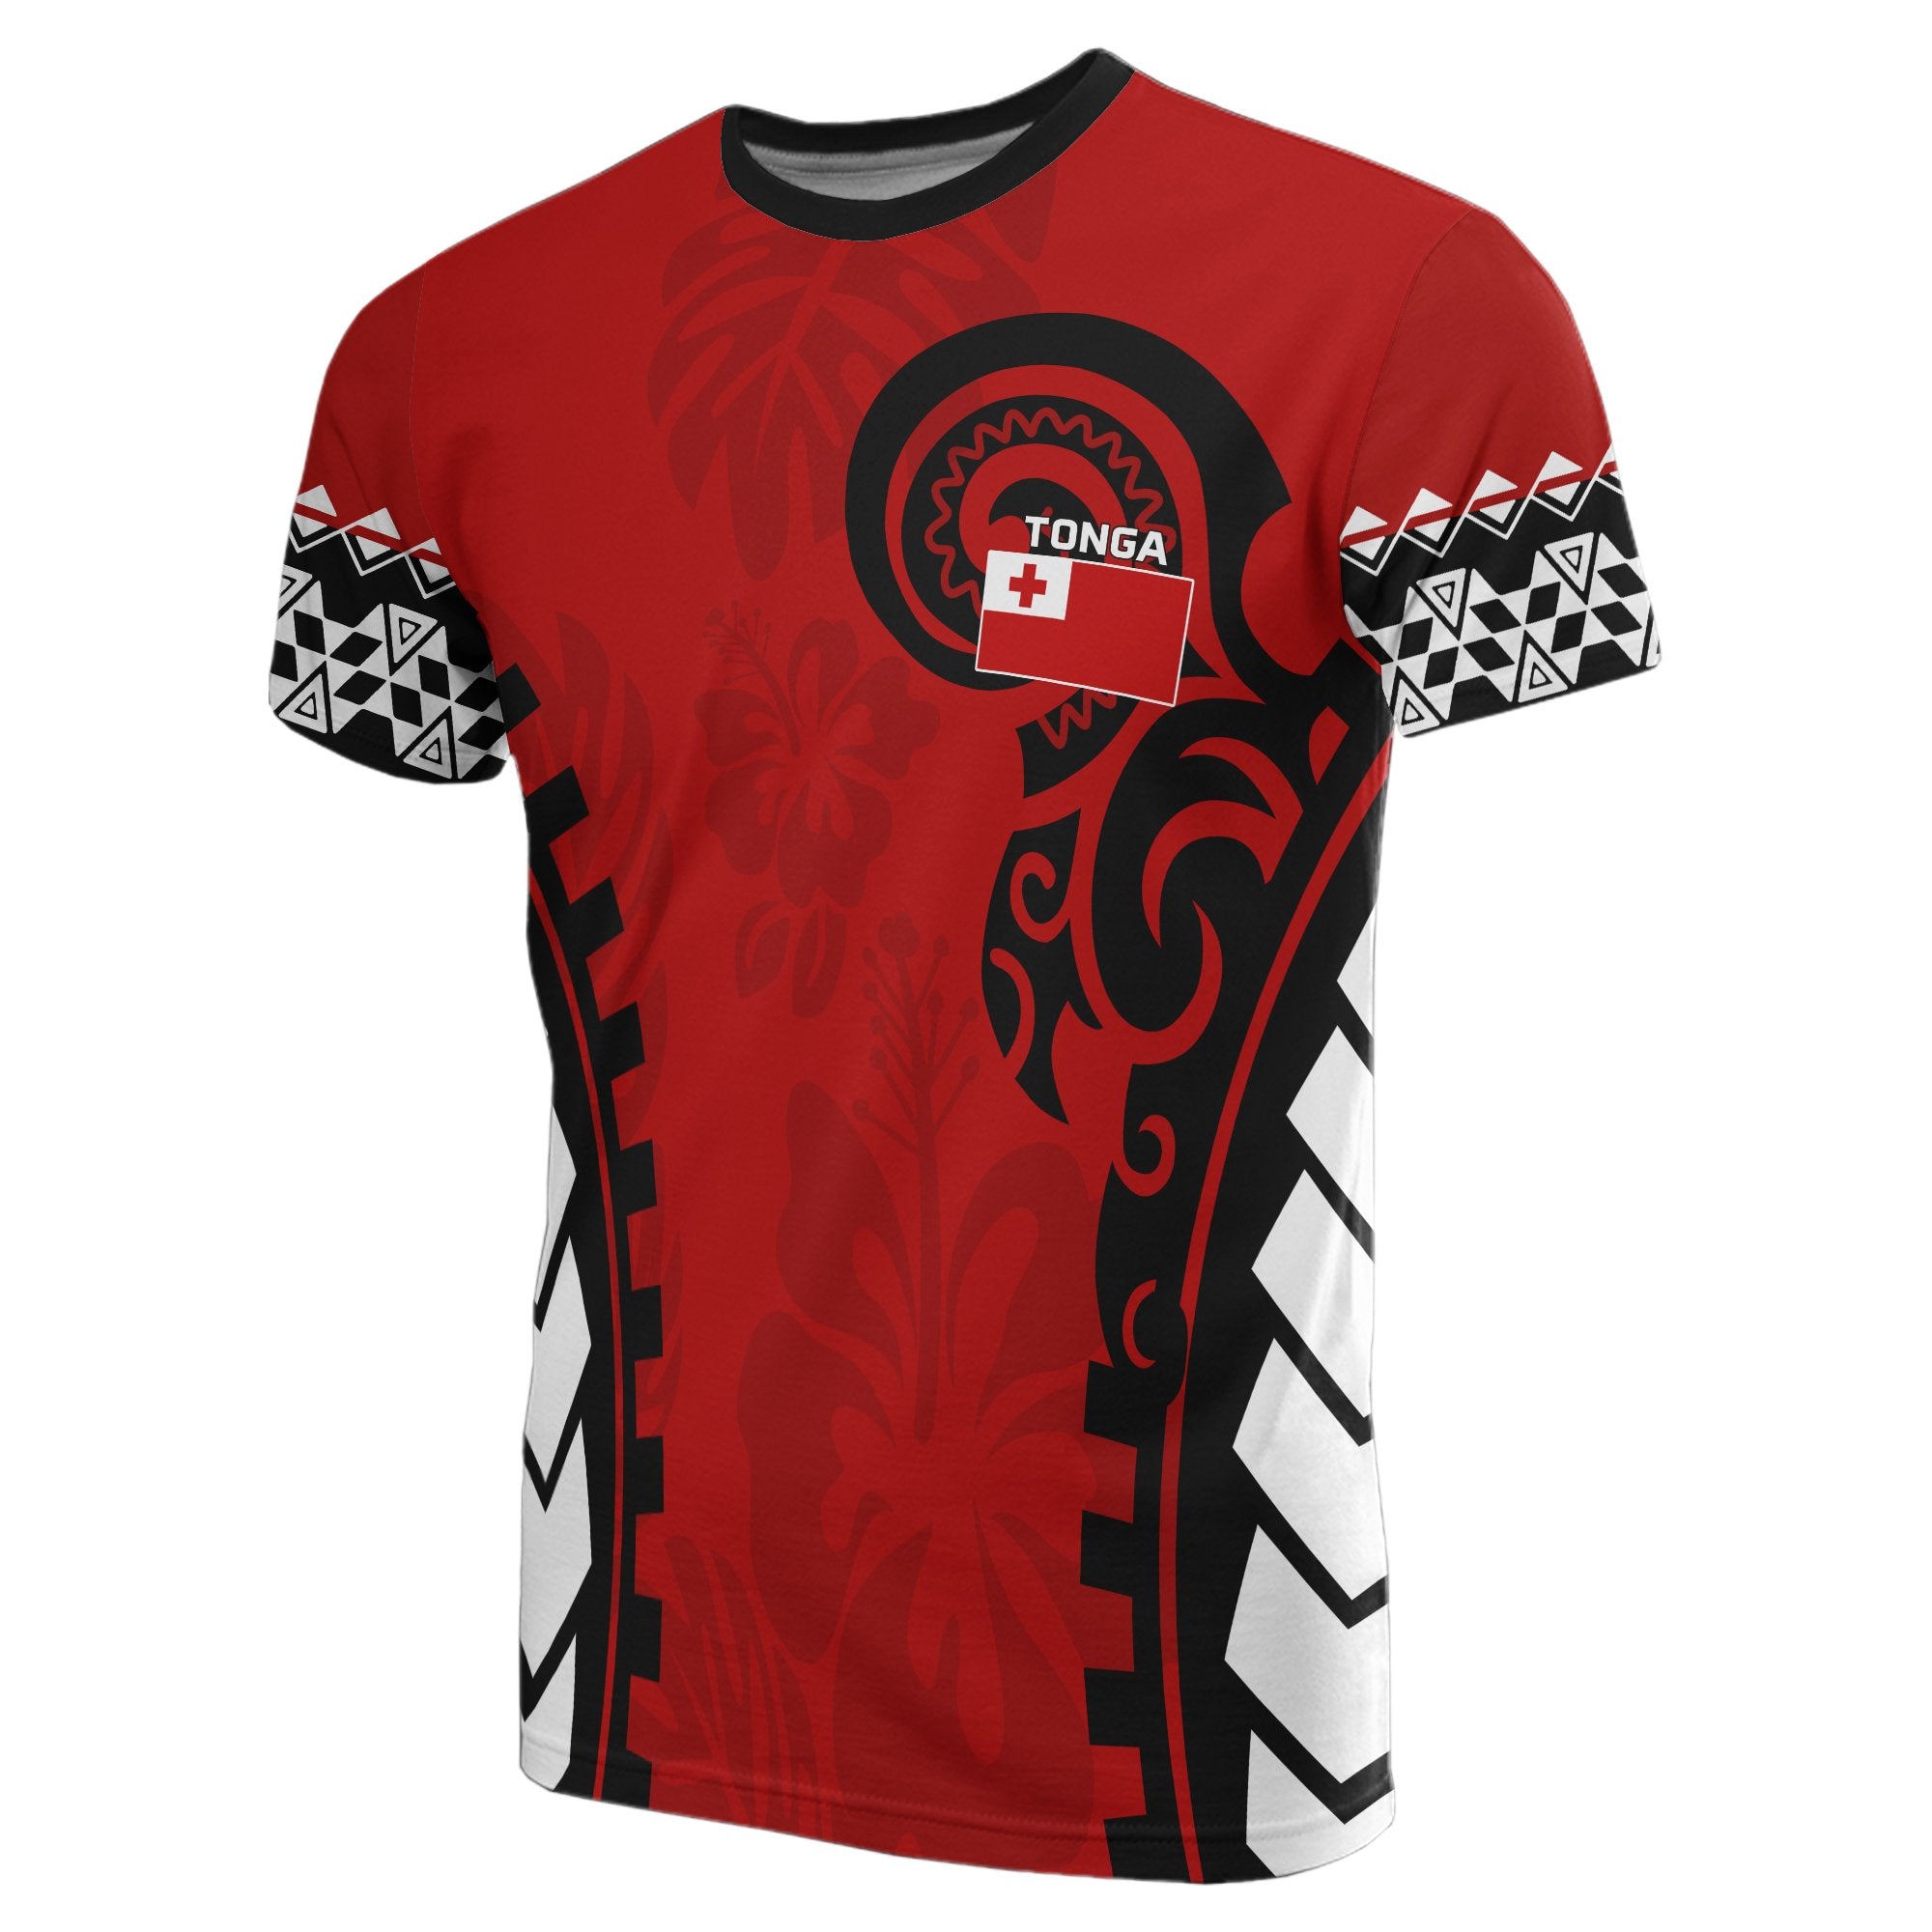 Tonga All Over T Shirt Tongan Flag Coat of Arms Warrior Style Unisex Red - Polynesian Pride